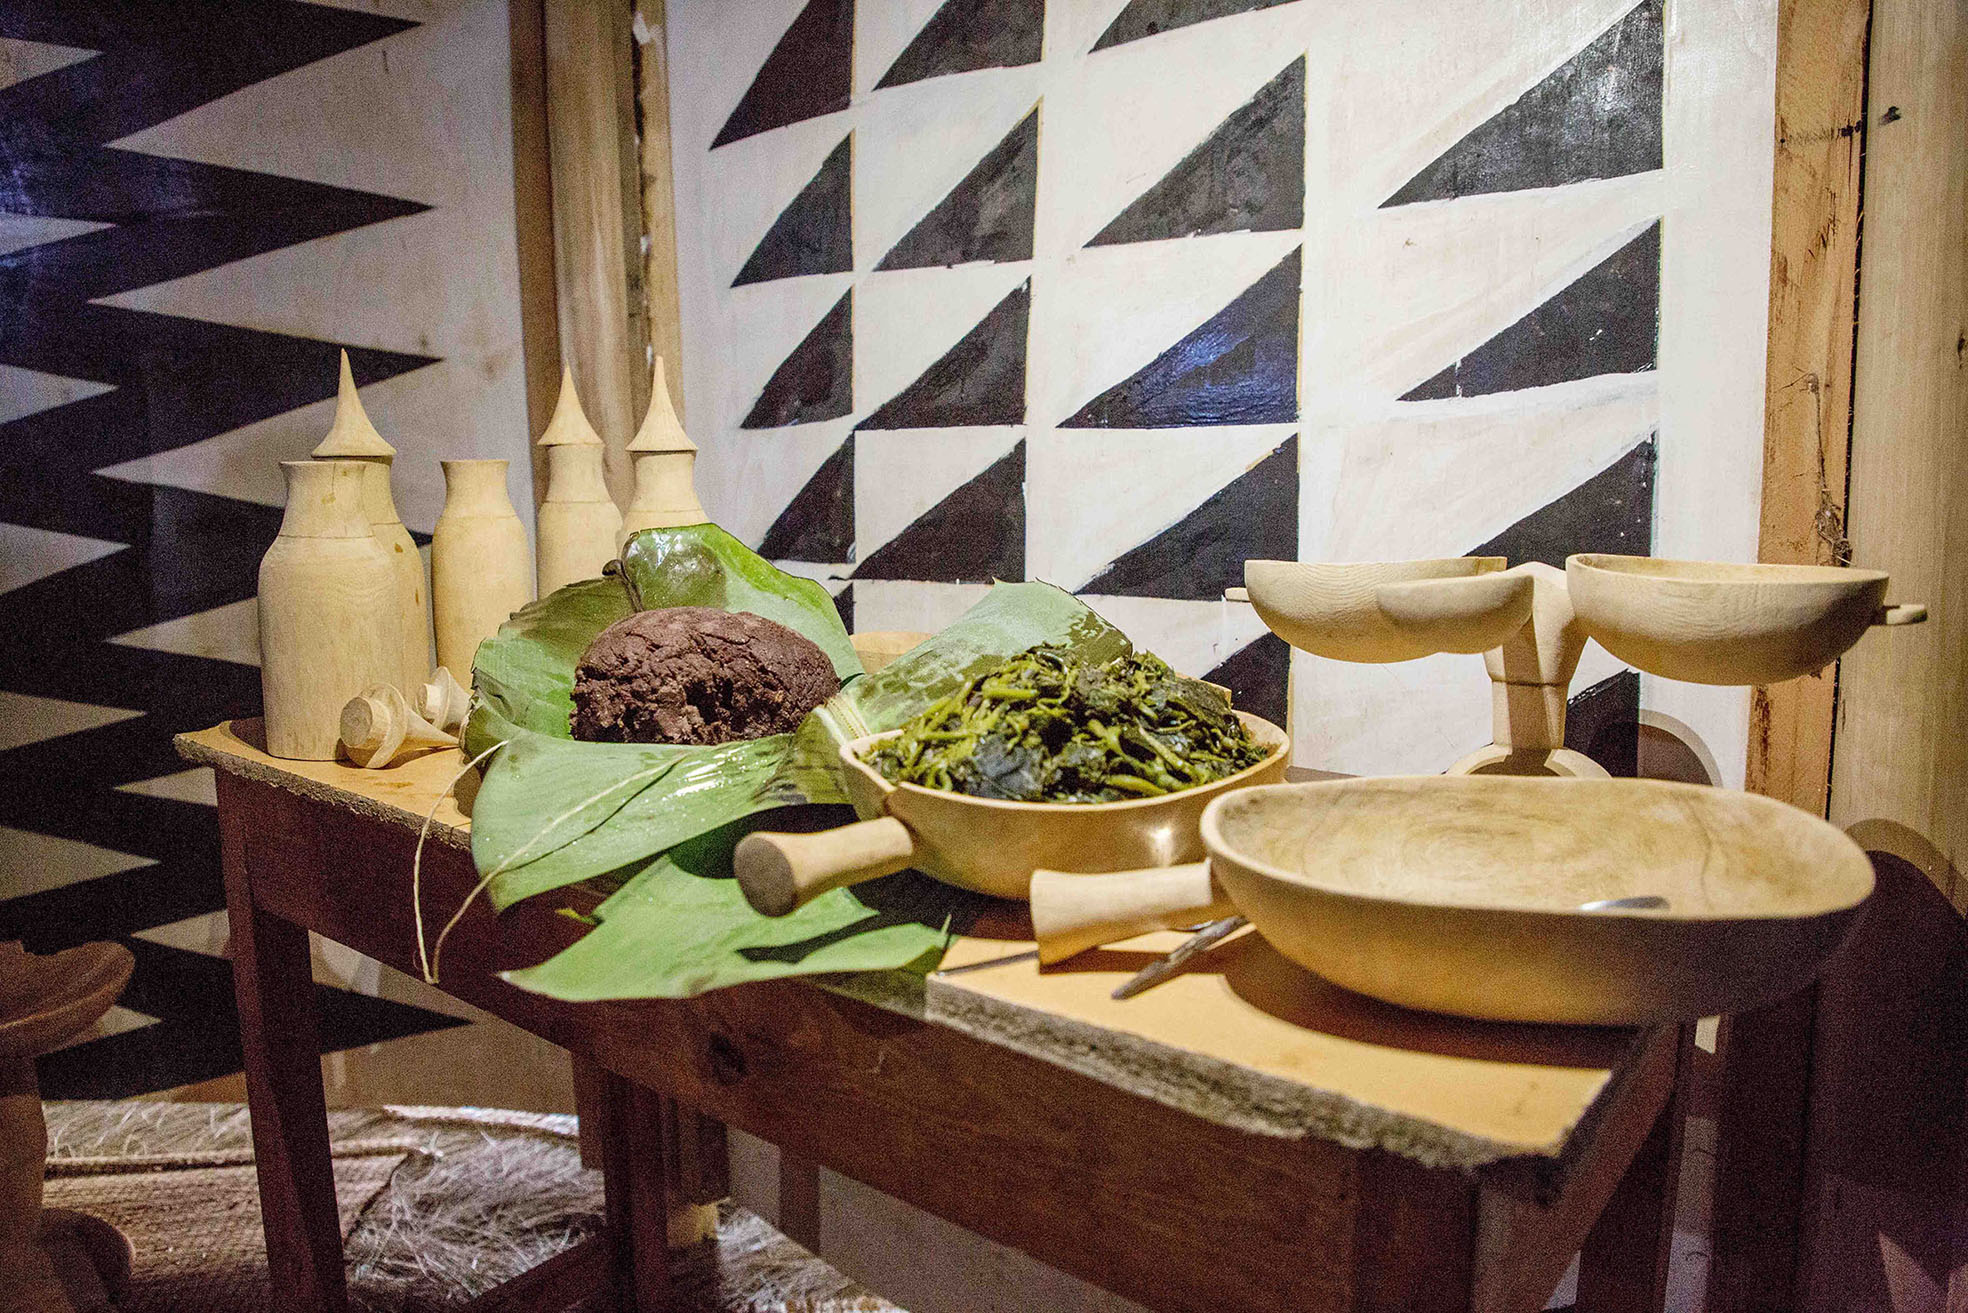 A traditional table set-up at Ikirenga Cultural Centre in Rulindo District. Sorghum cake, vegetables and milk were important meals in Rwanda. Photos: Dan Nsengiyumva.